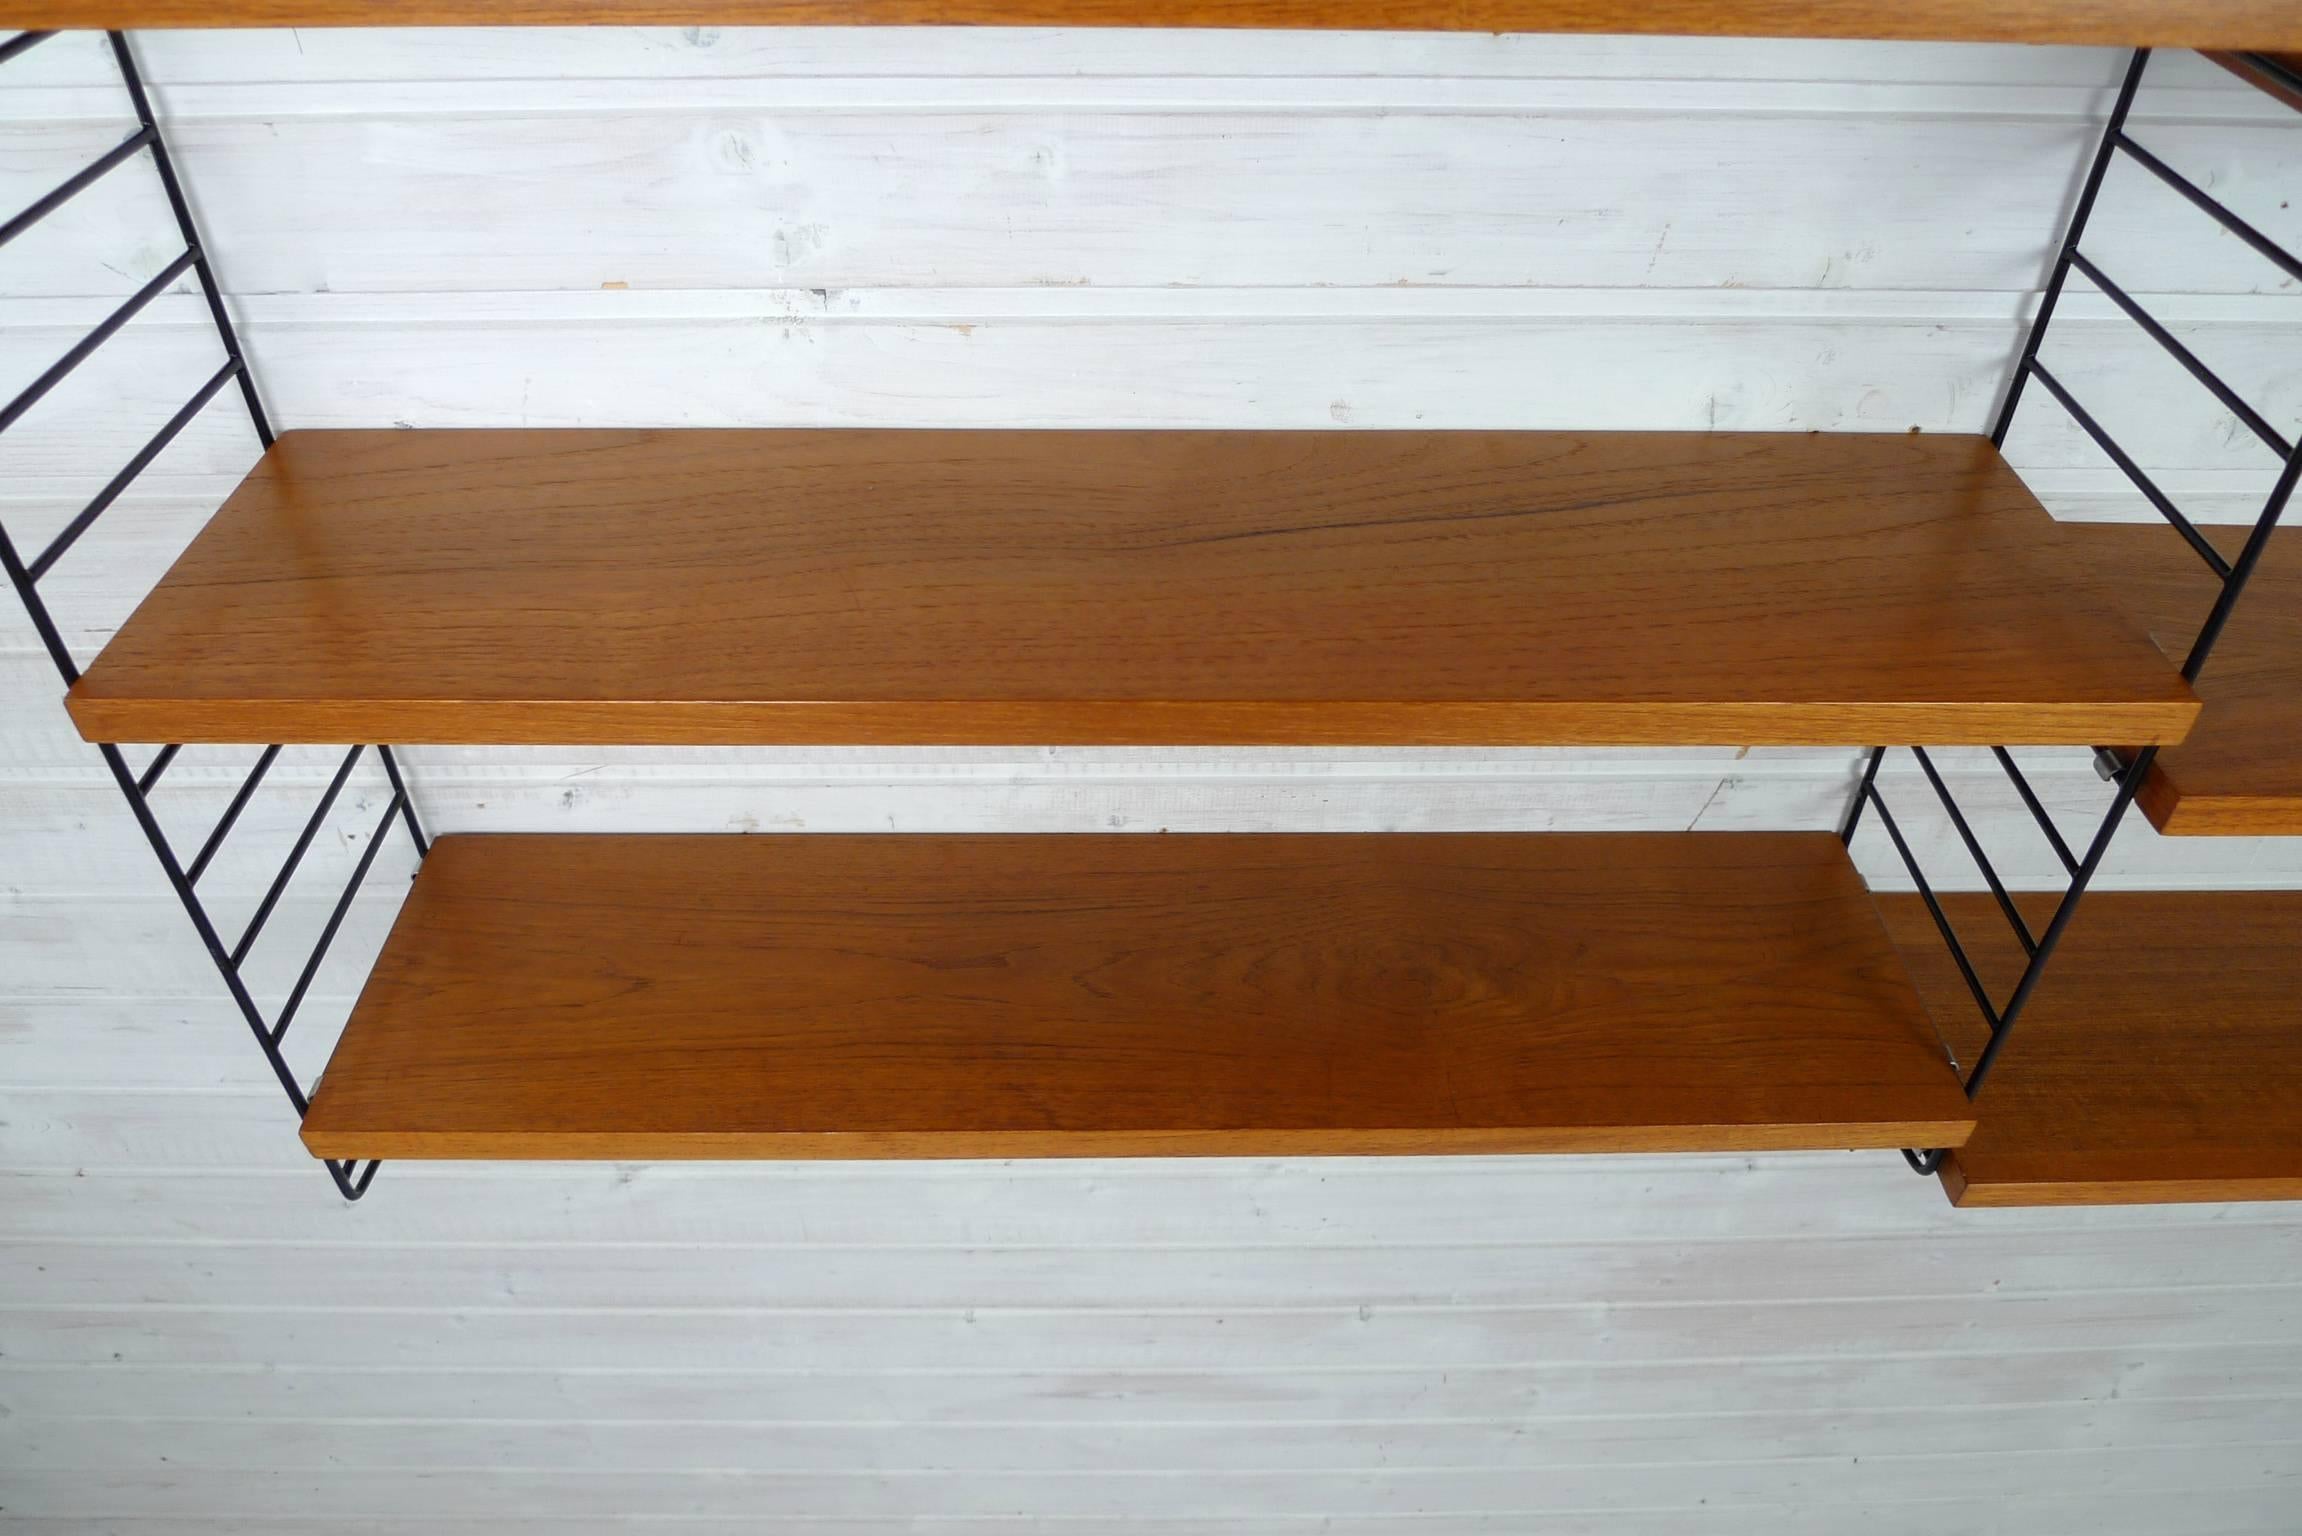 20th Century Teak Wall Shelving System by Nisse Strinning for Sting Design AB, Sweden, 1960s